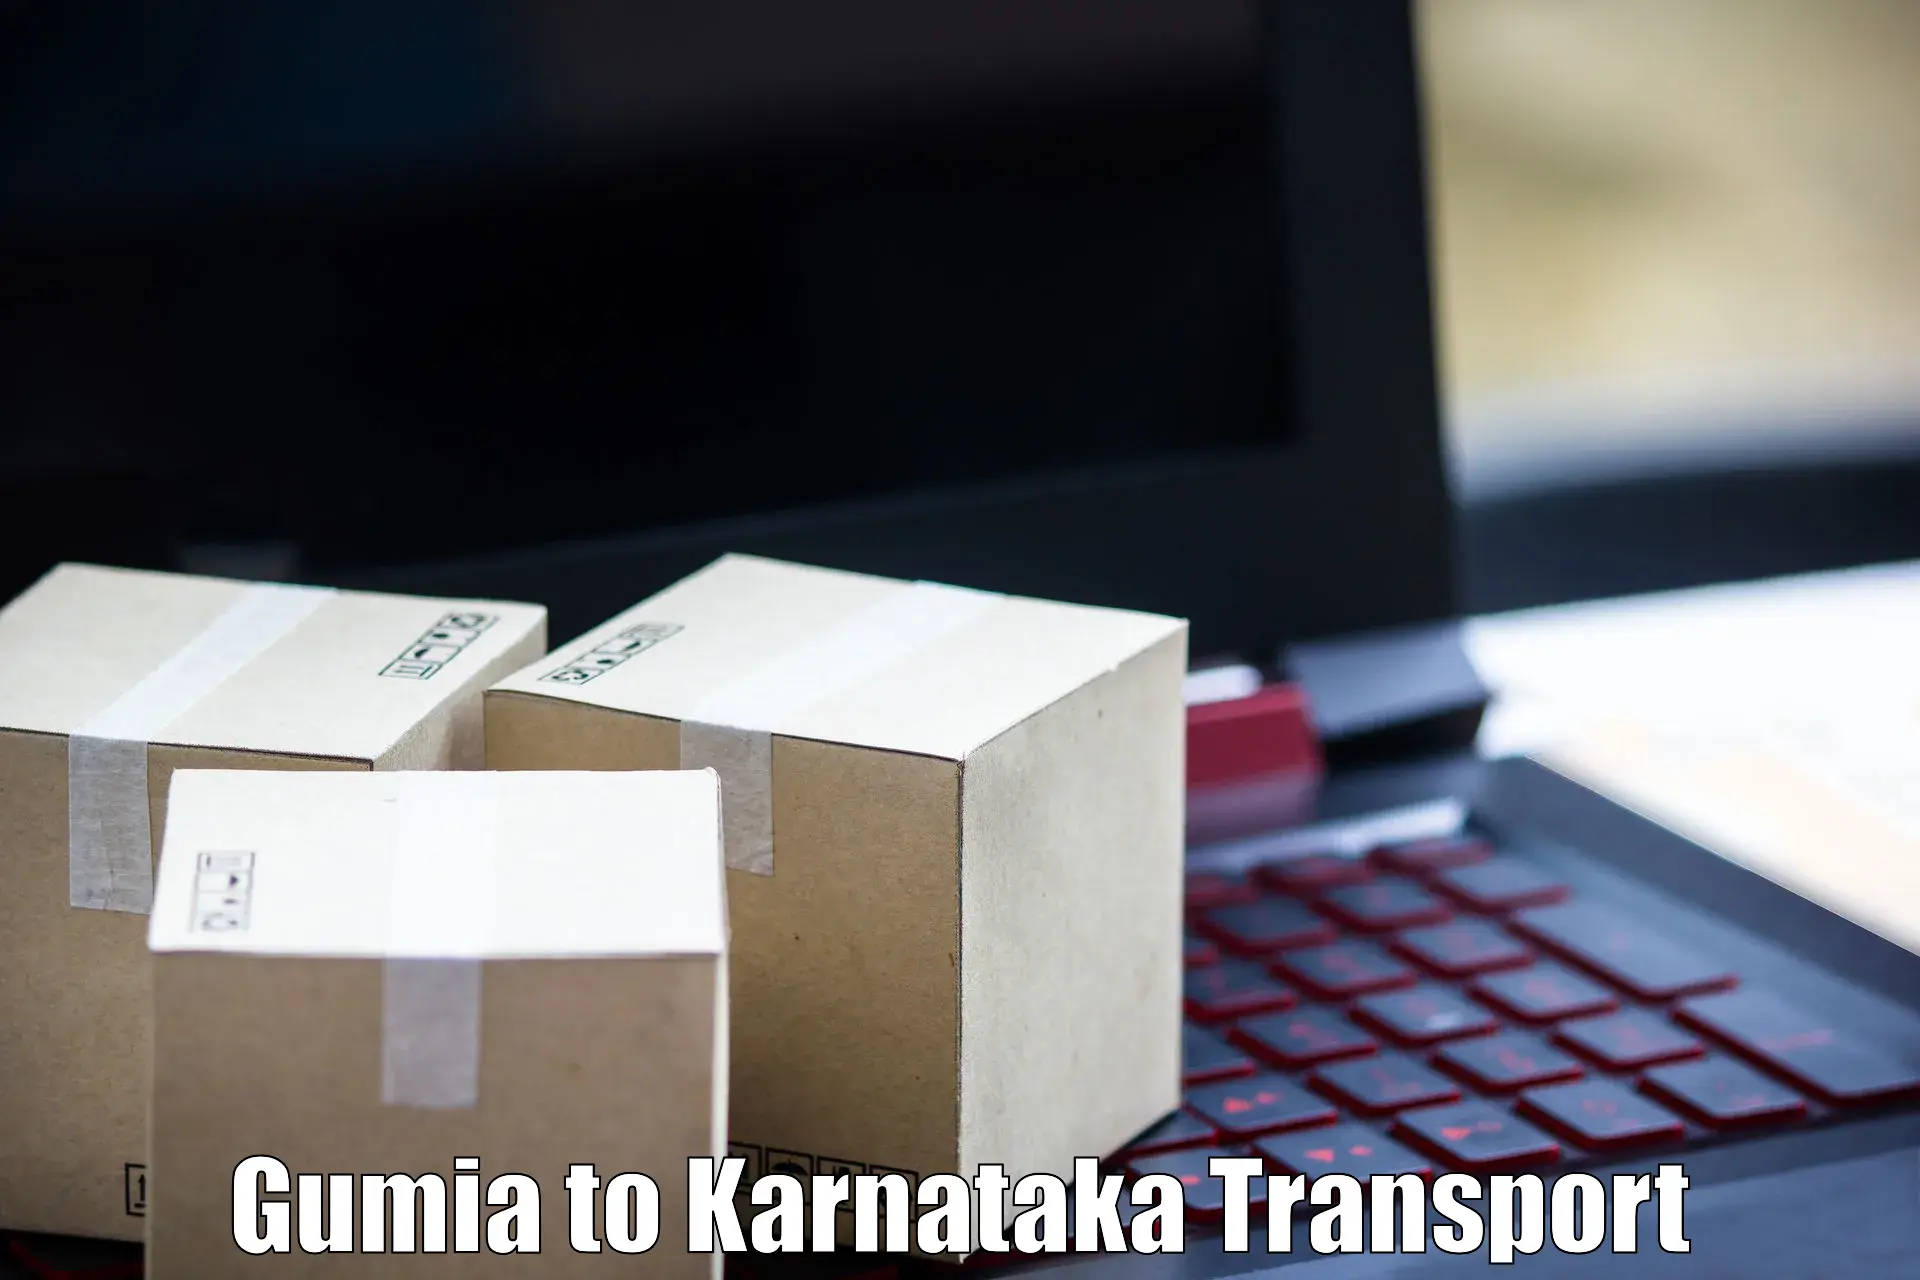 Road transport services in Gumia to Bantwal